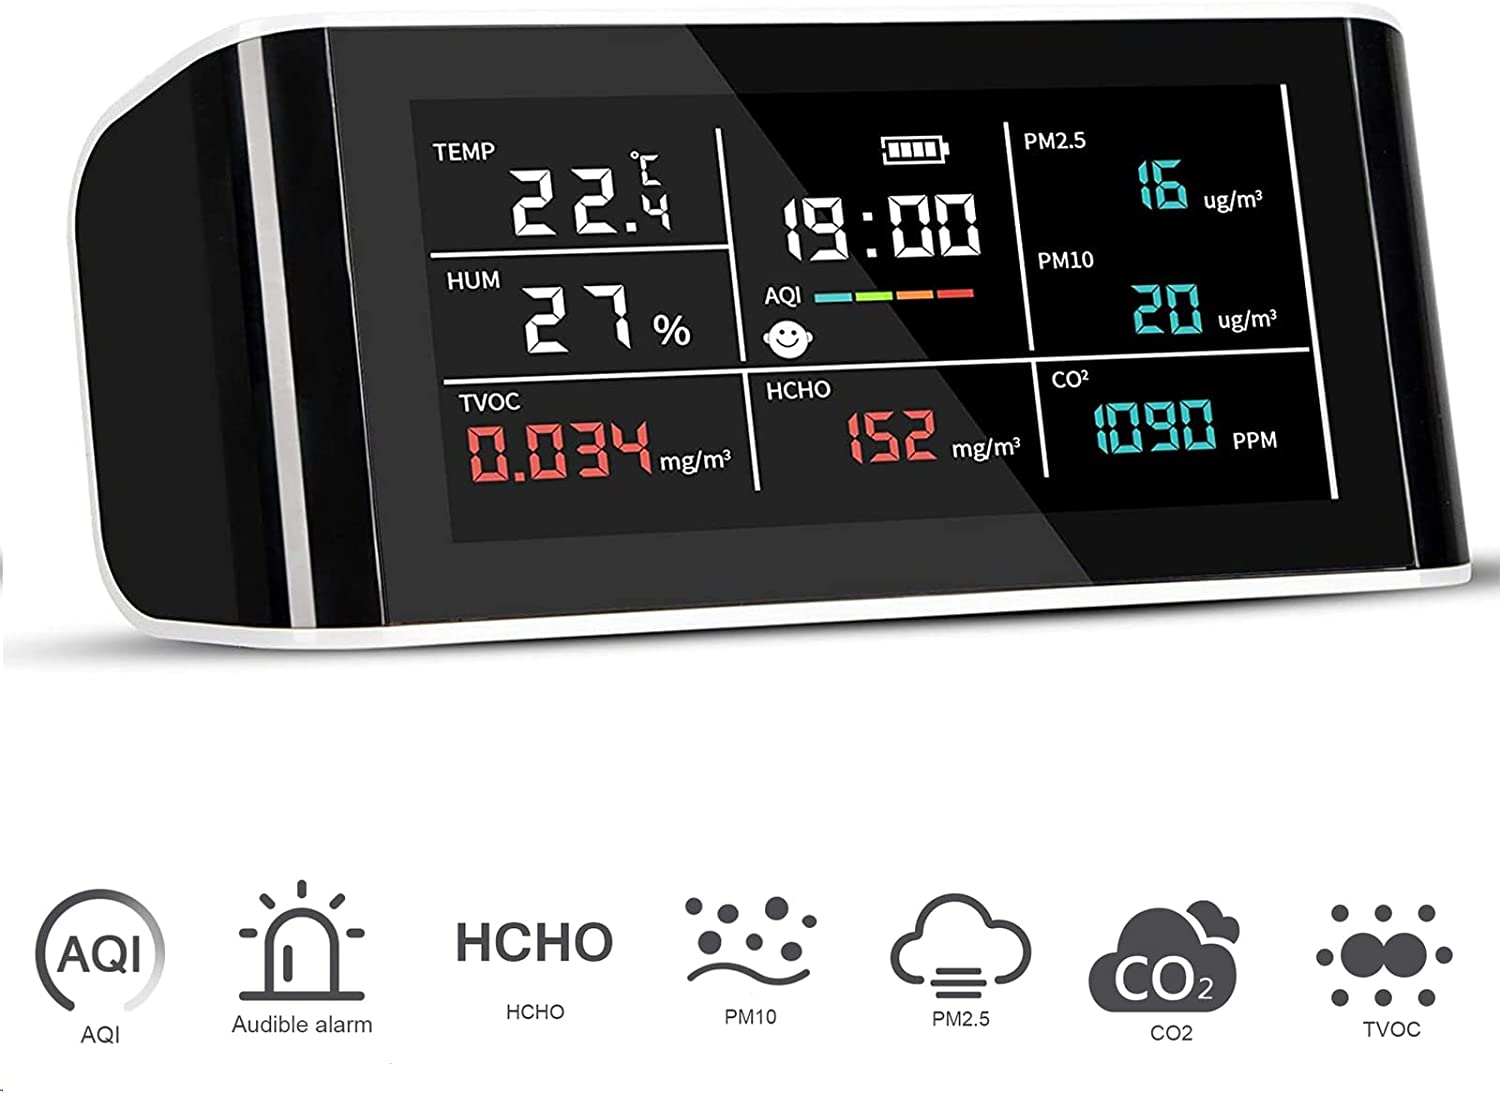 DM-69 Air Quality Monitor 8 In 1 for CO2, PM2.5, PM10, TVOC, HCHO, AQI, Temp and Humidity